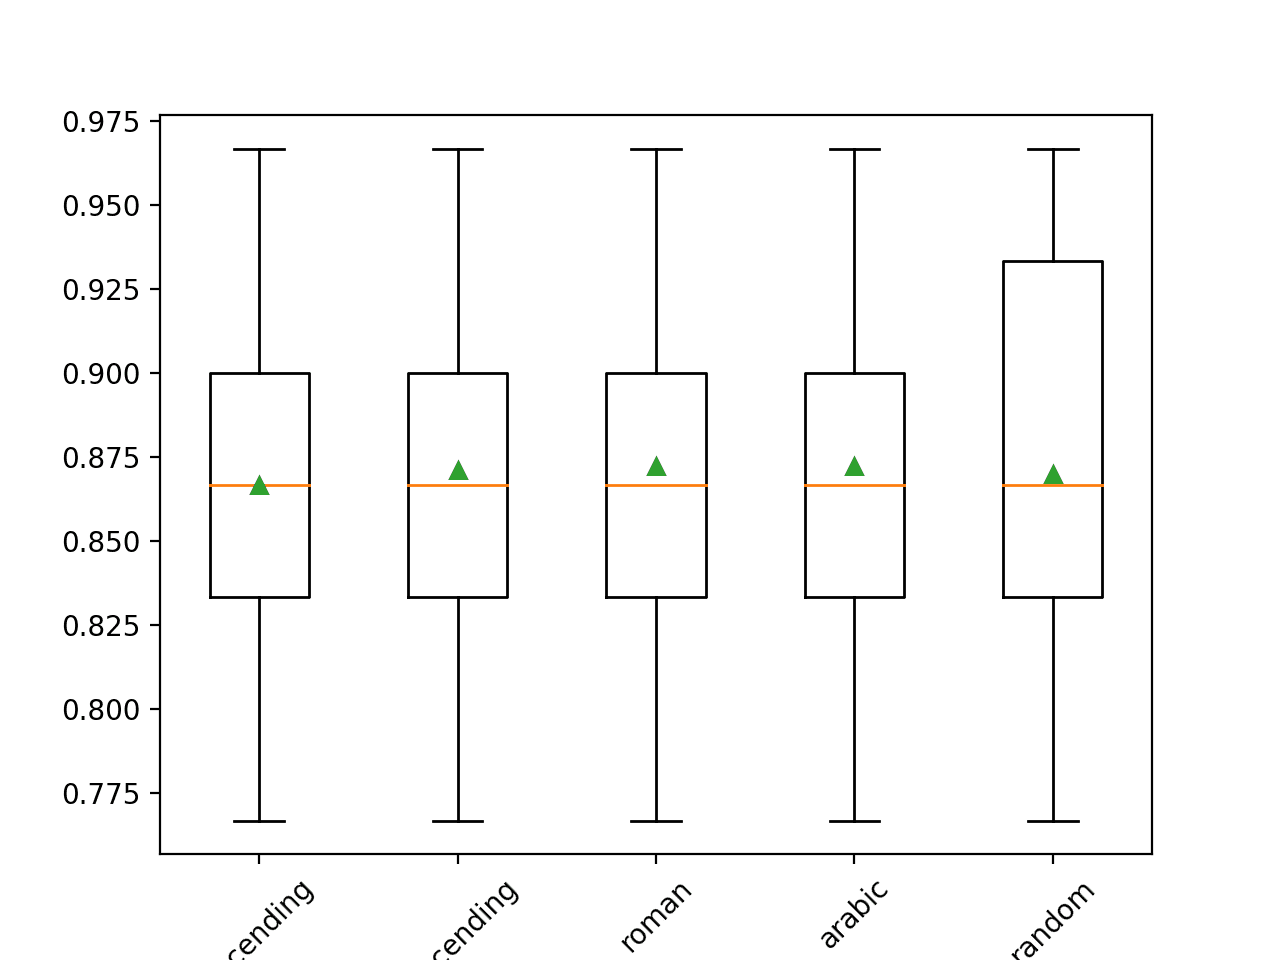 Box and Whisker Plot of Imputation Order Strategies Applied to the Horse Colic Dataset